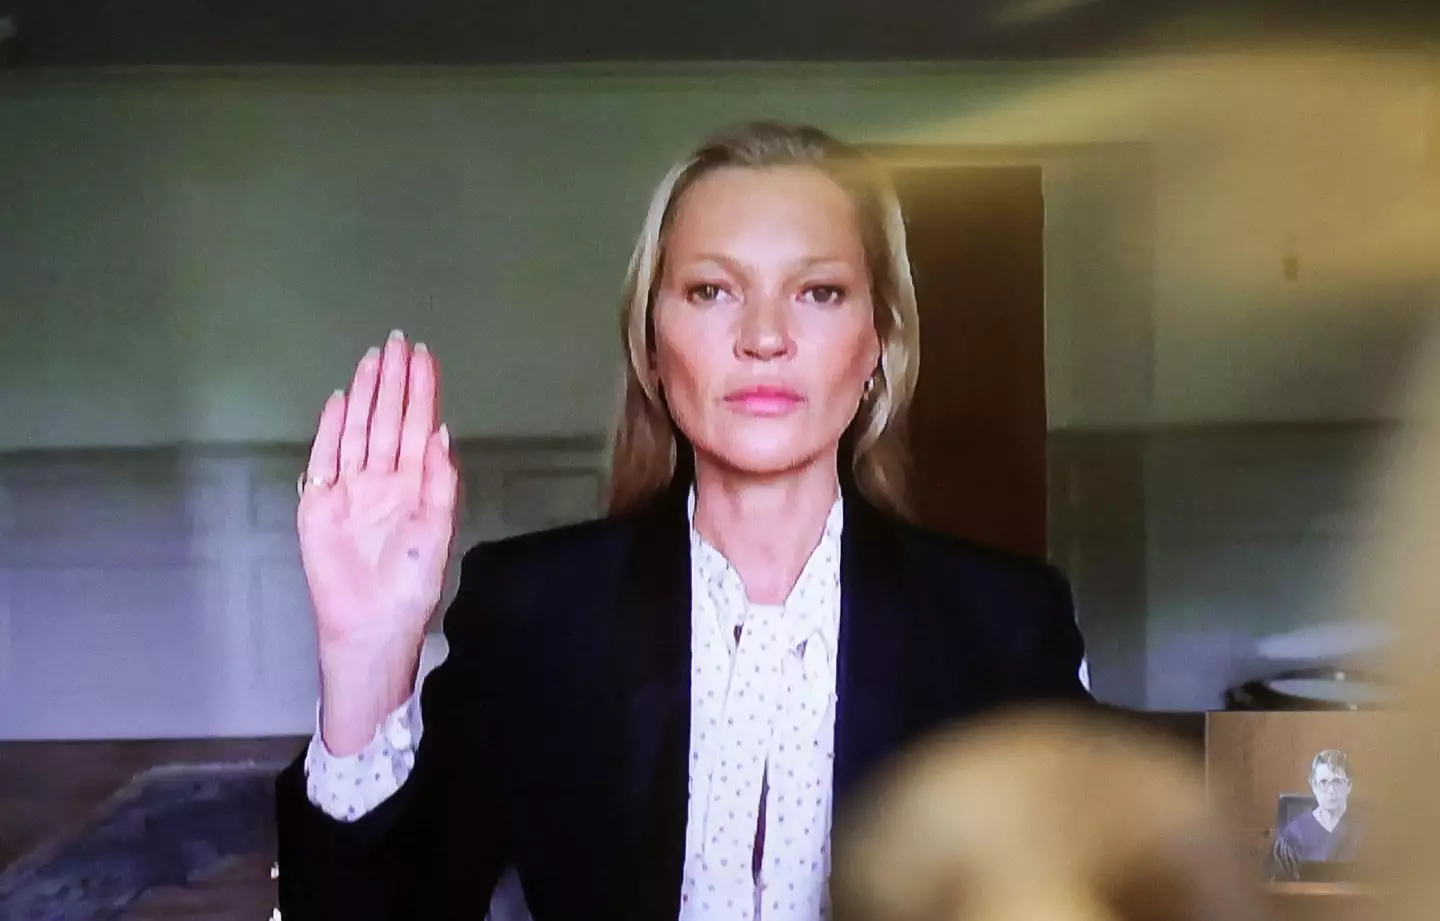 Kate Moss' testimony was cited as a key moment in the trial.